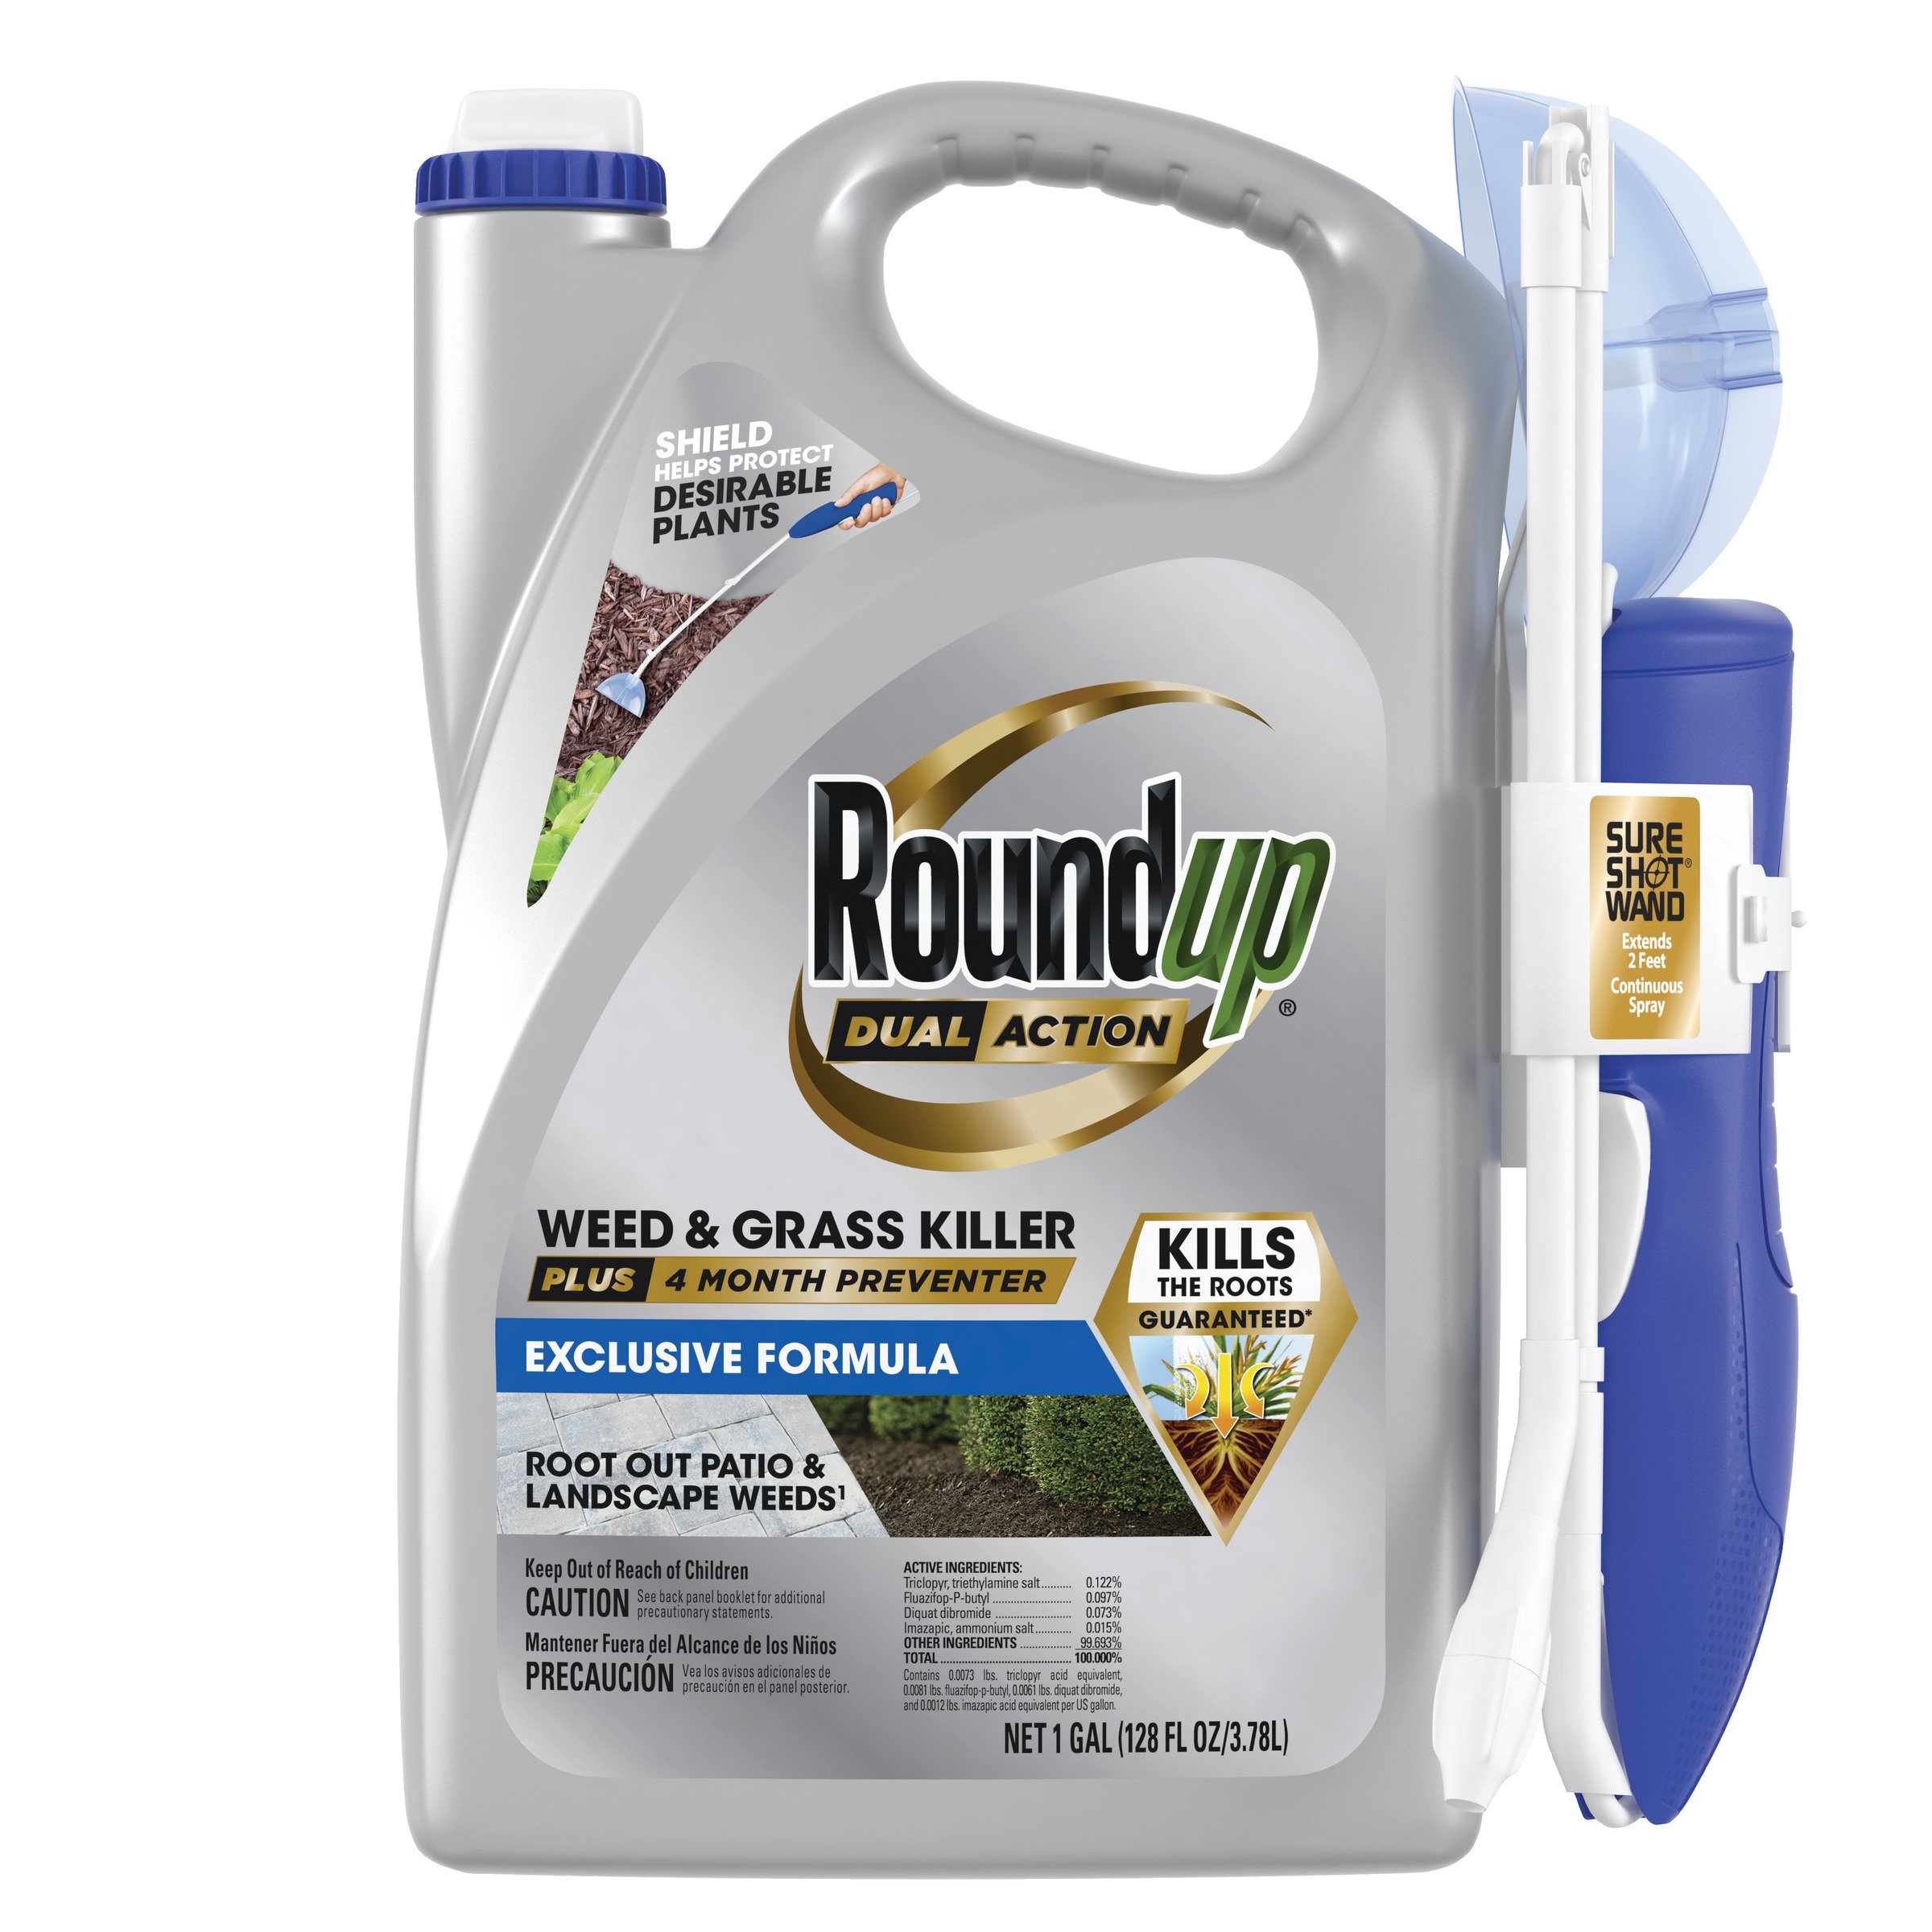 Roundup Dual Action Weed & Grass Killer Plus 4 Month Preventer with Sure Shot Wand, 128 oz. - 5378304